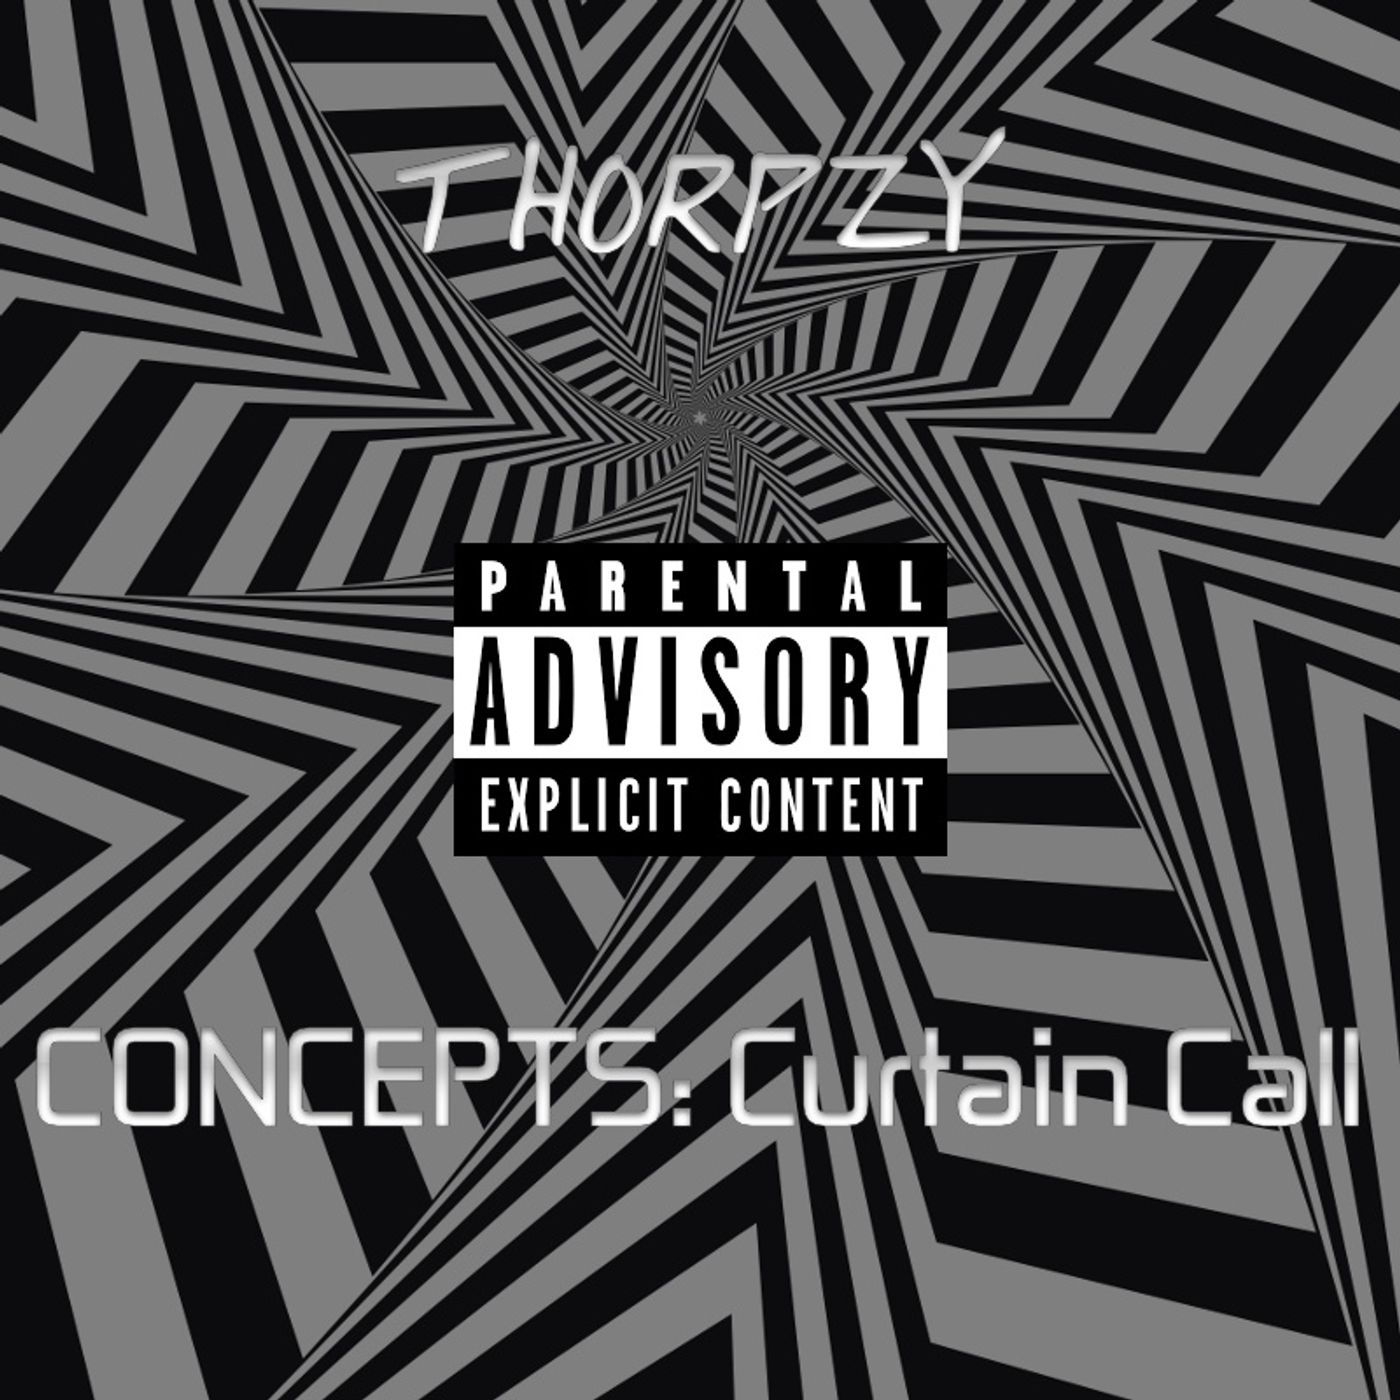 Concepts: Curtain Call